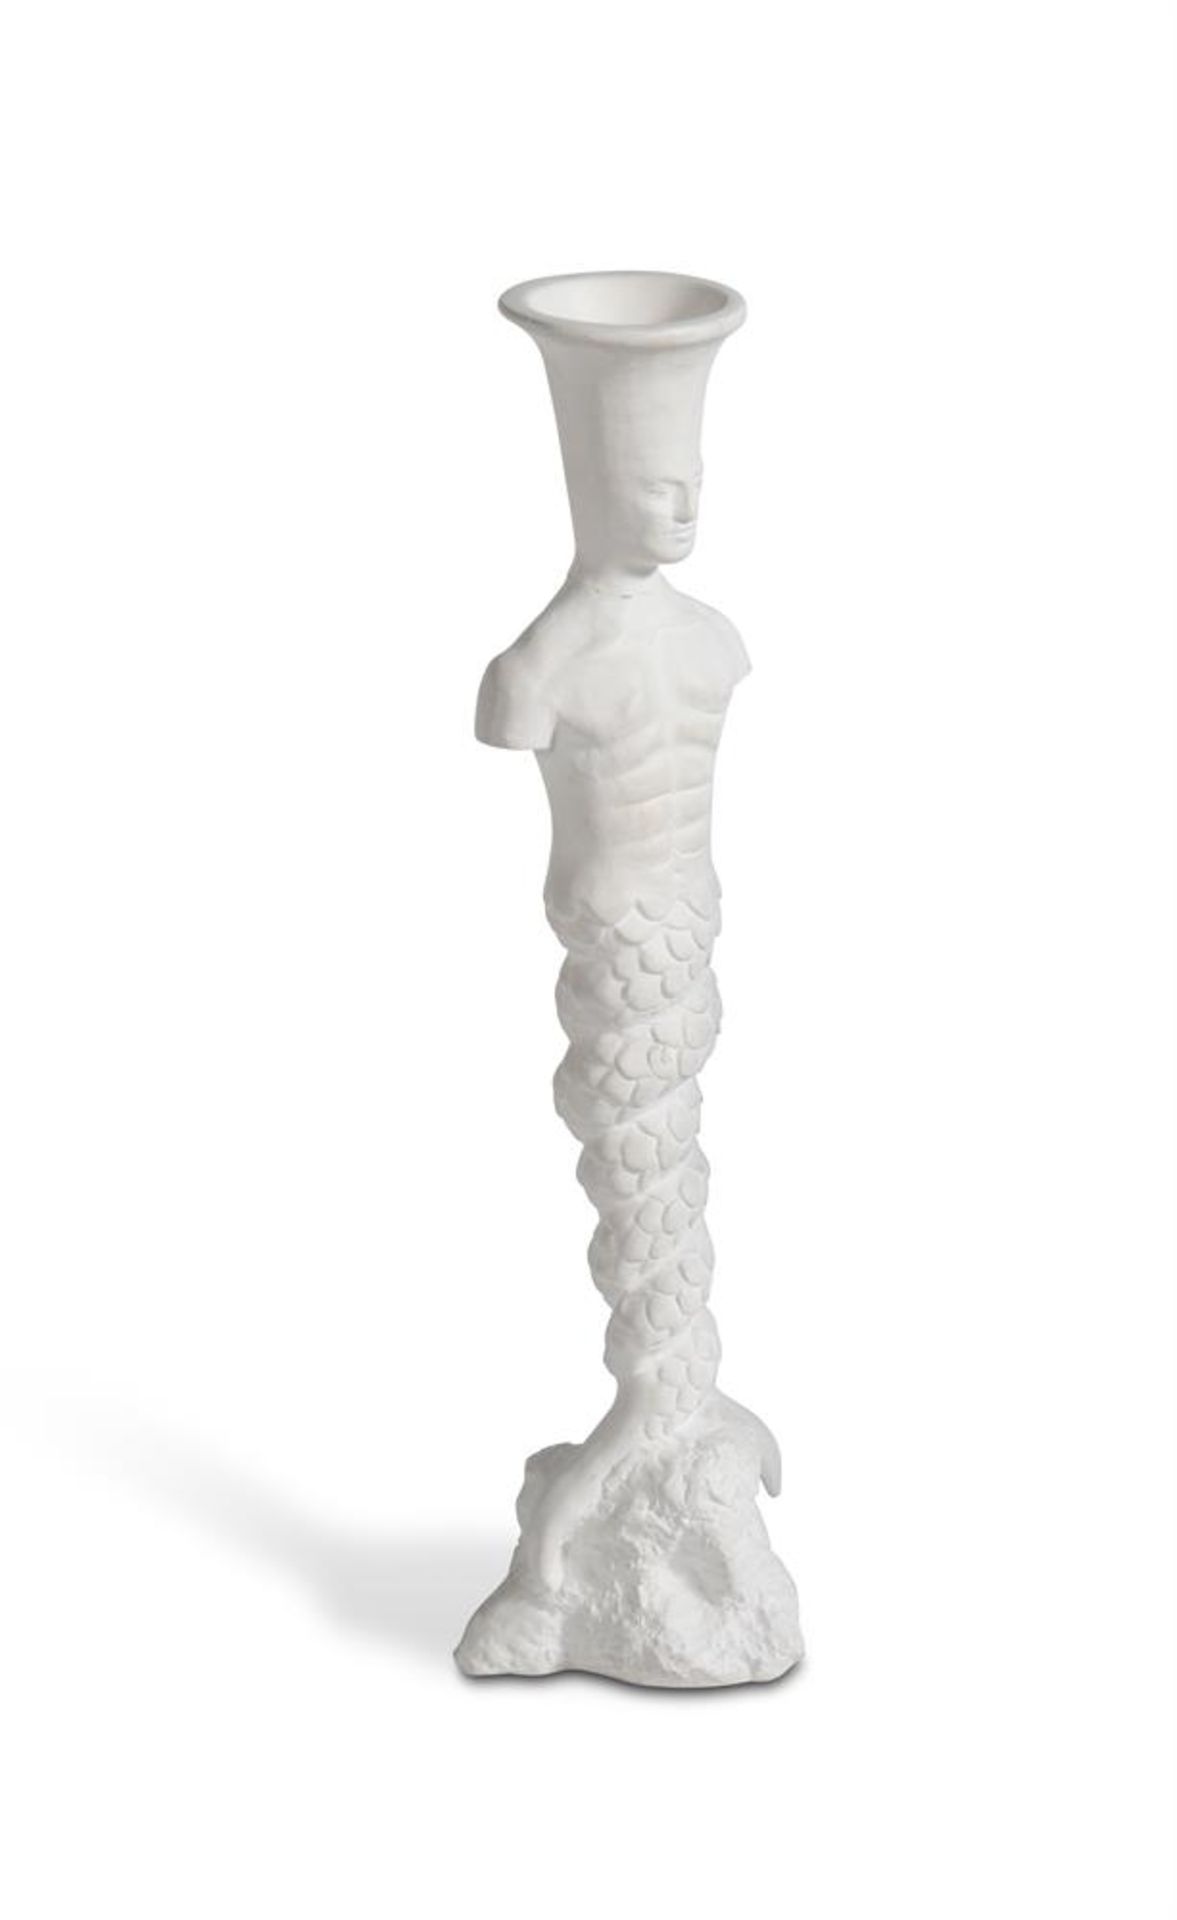 A PAIR OF MOULDED PLASTER FIGURAL CANDLESTICKS, MODERN - Image 3 of 3